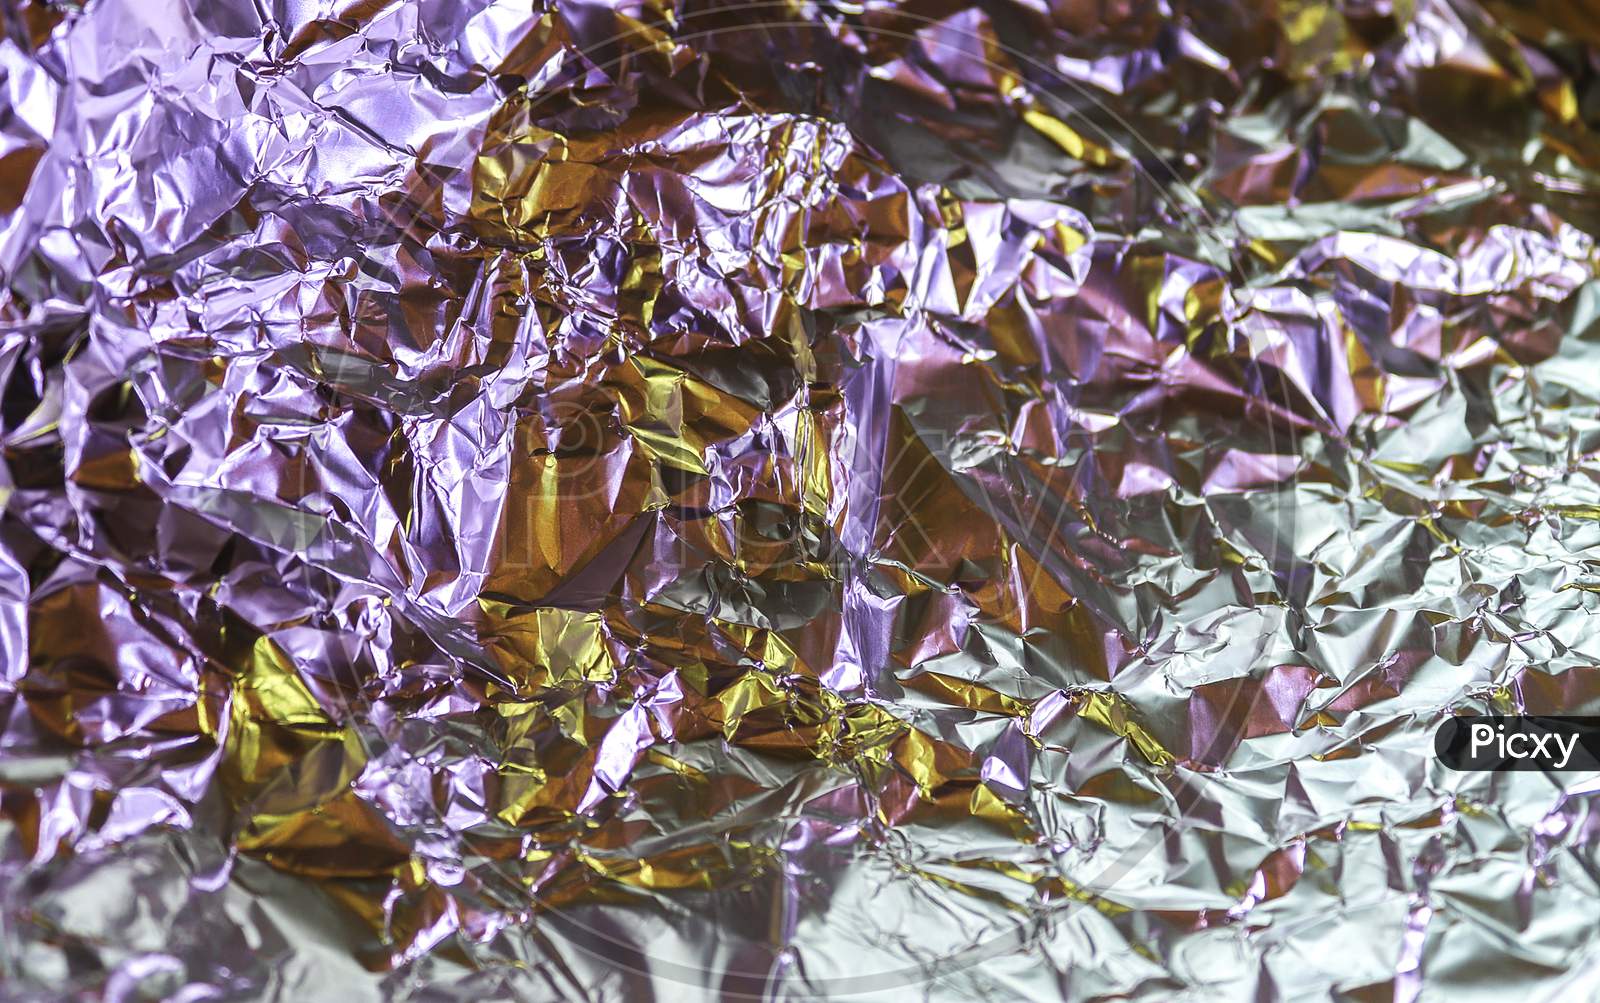 Detailed close up texture of an aluminum foil surface in different